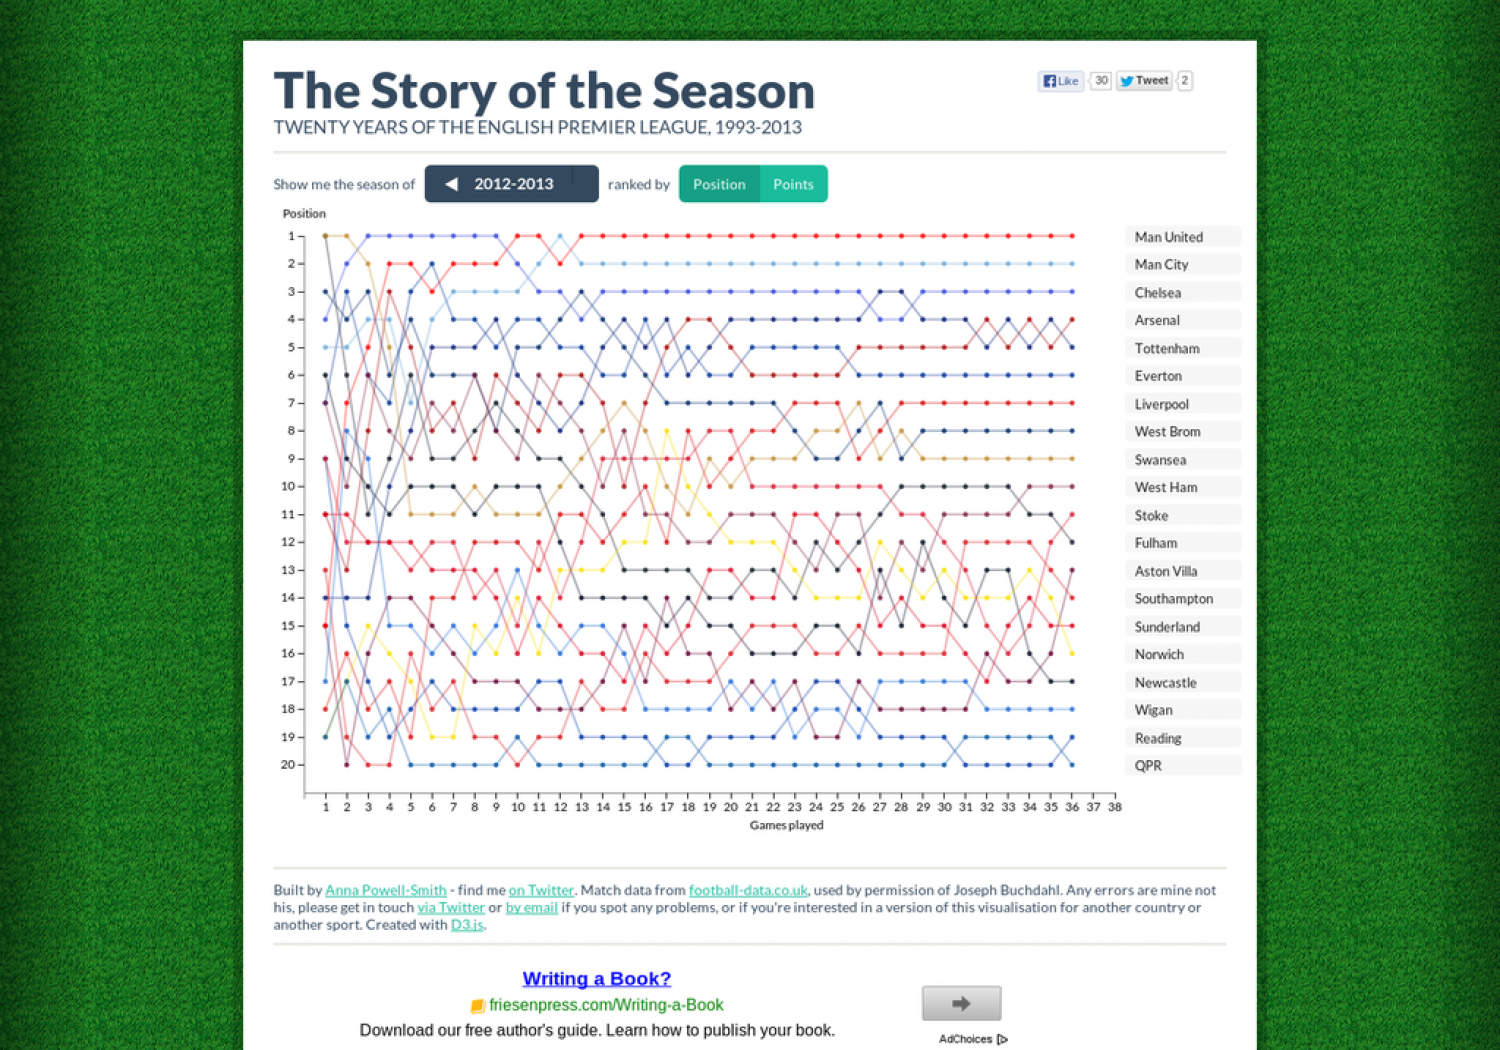 The Story of the Season Infographic